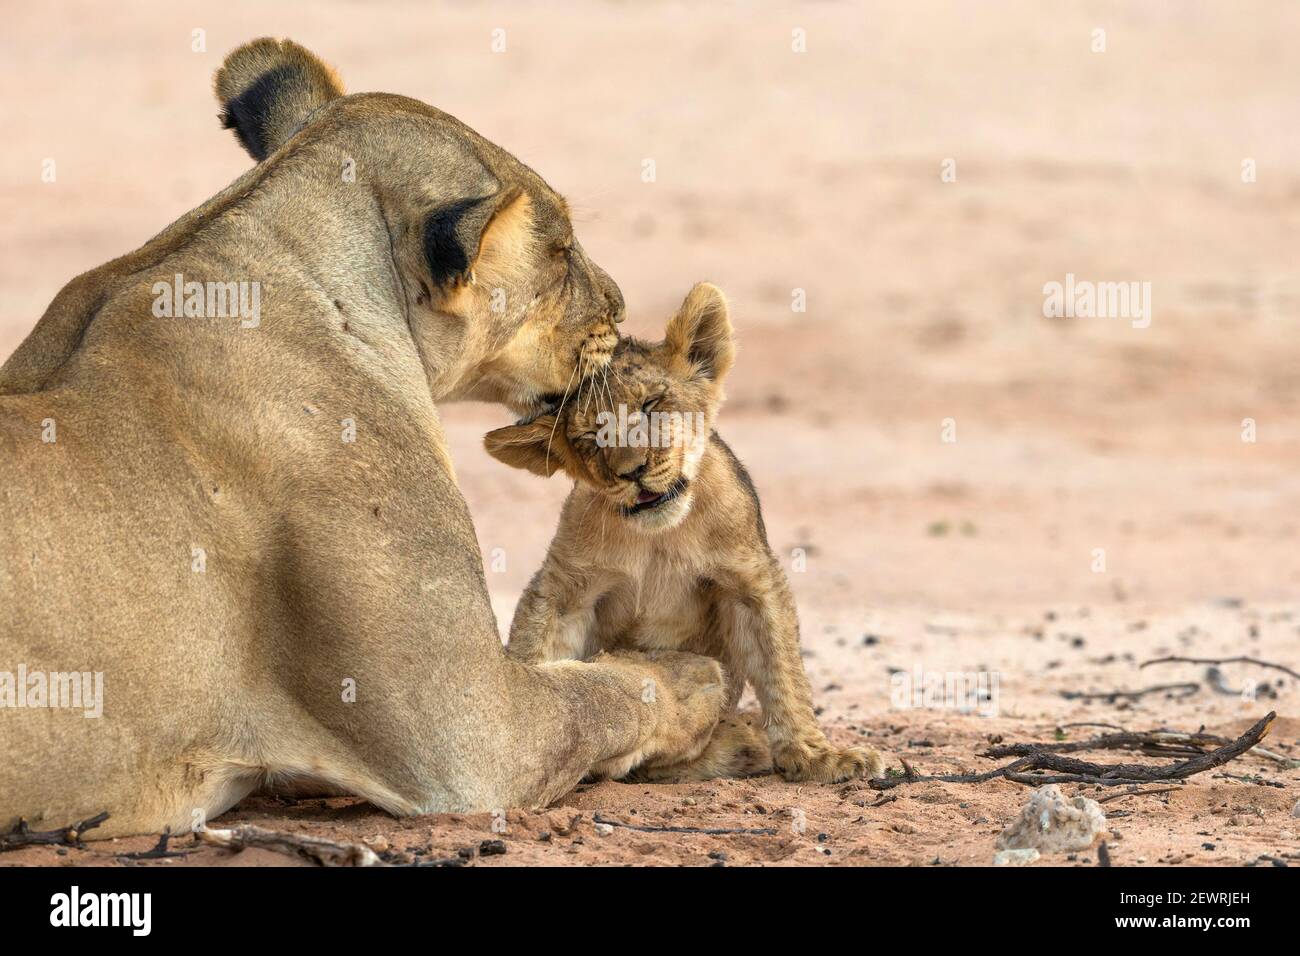 Lioness (Panthera leo) grooming cub, Kgalagadi Transfrontier Park, South Africa, Africa Stock Photo